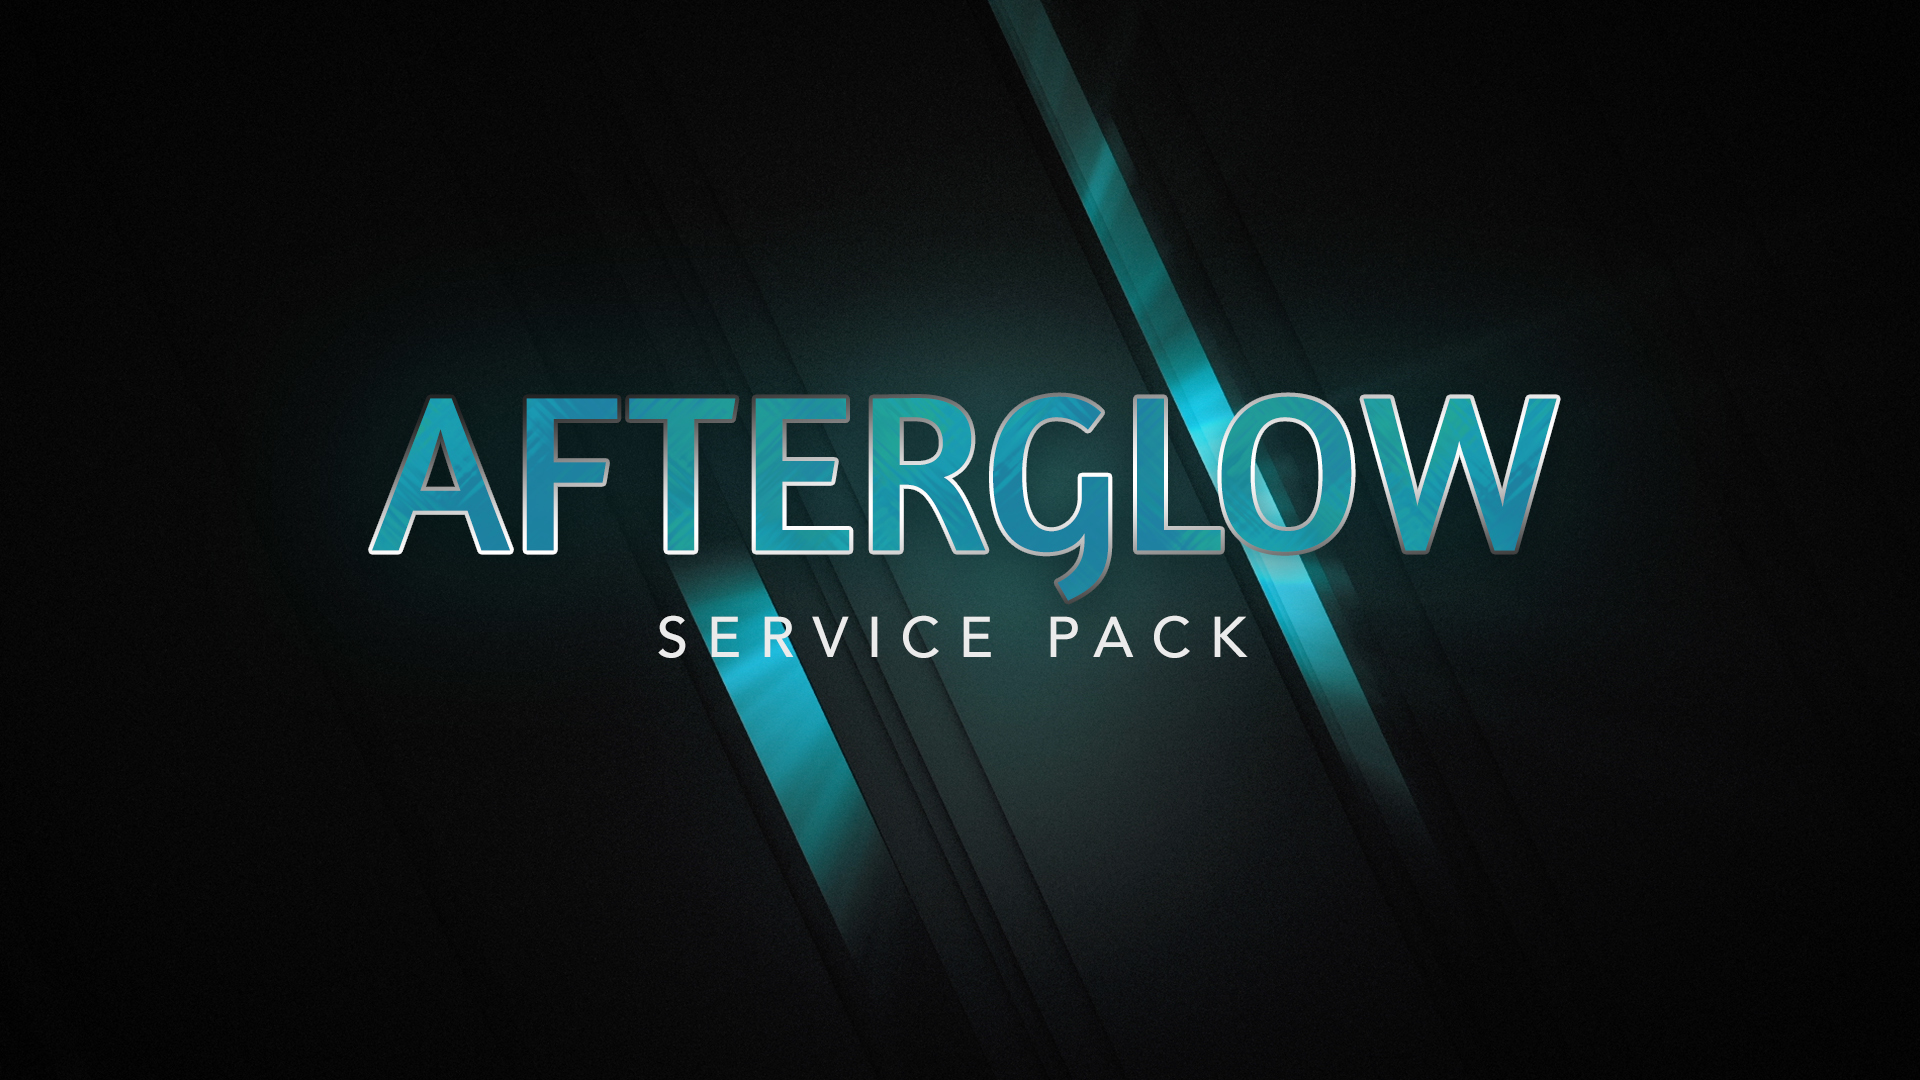 Afterglow Service Pack